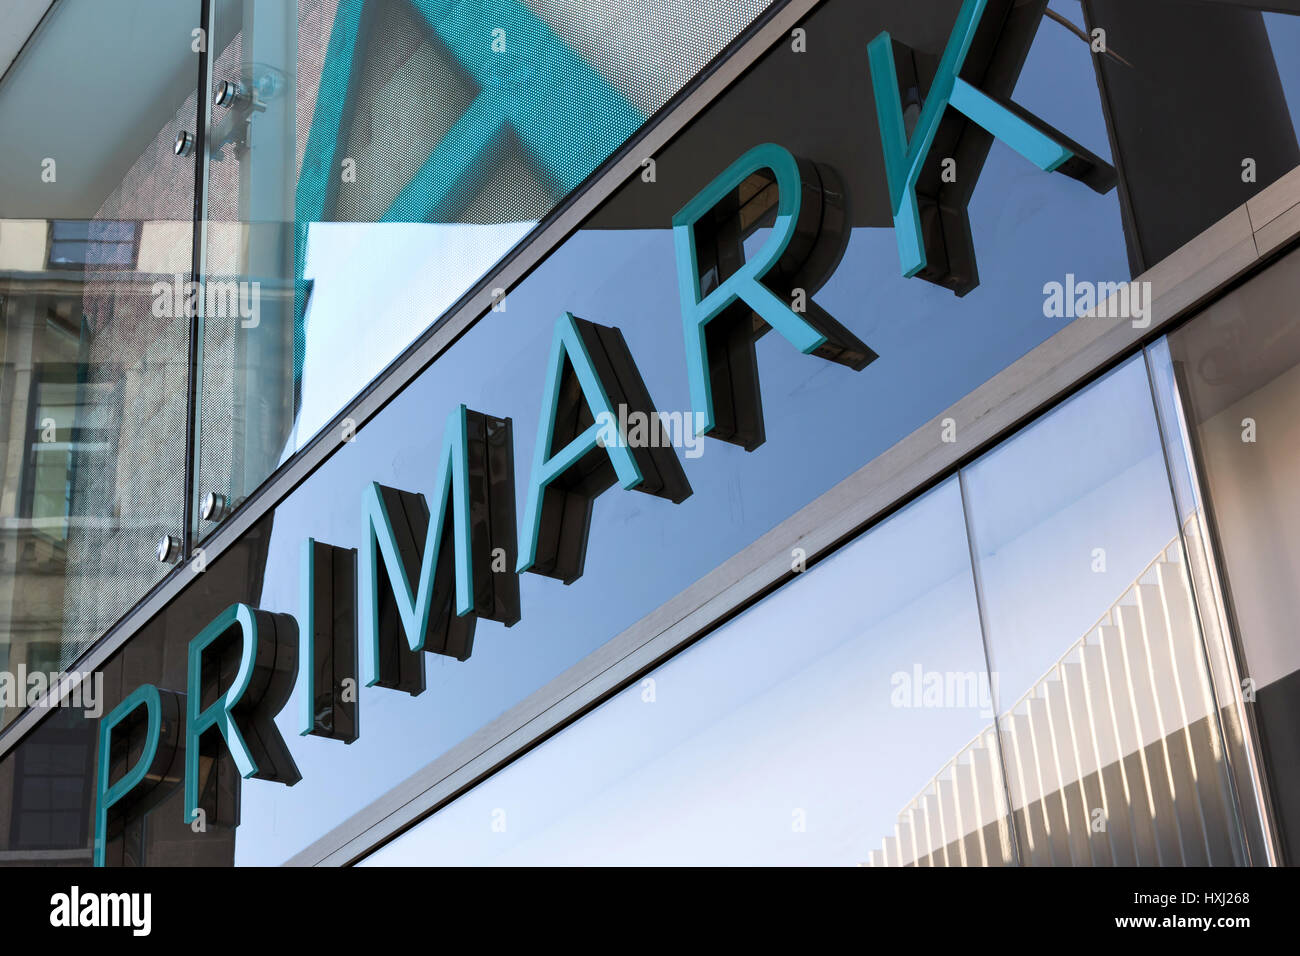 Lettering at Primark store in Cologne/ Germany. Primark is an Irish clothing retailer and a subsidiary of Associated British Foods. Stock Photo